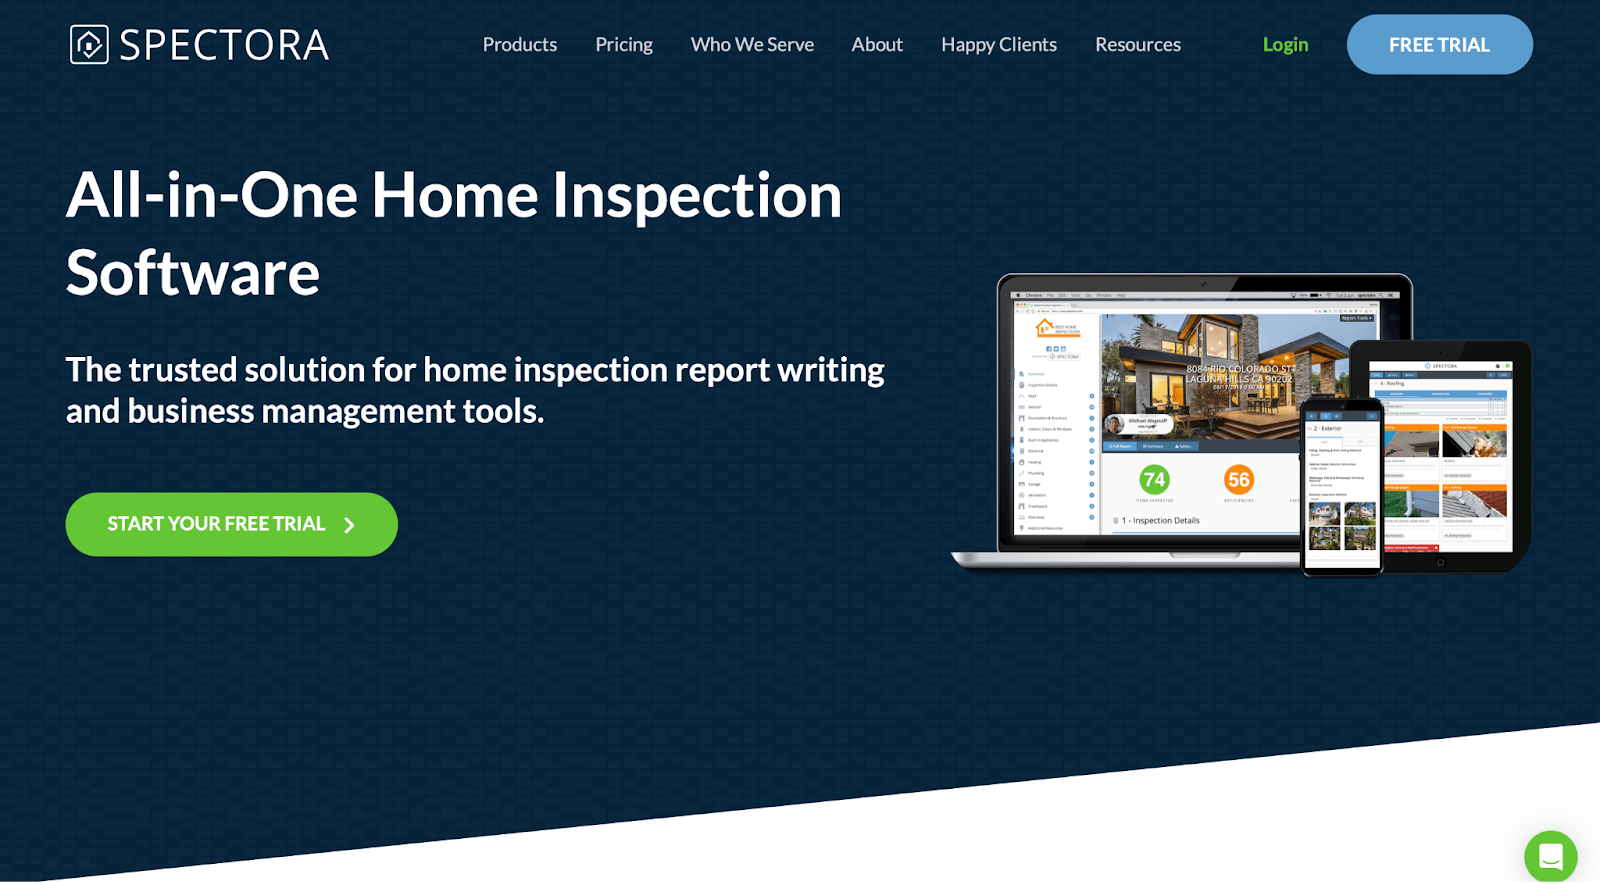 The Role of Tools and Technology in a Home Inspection